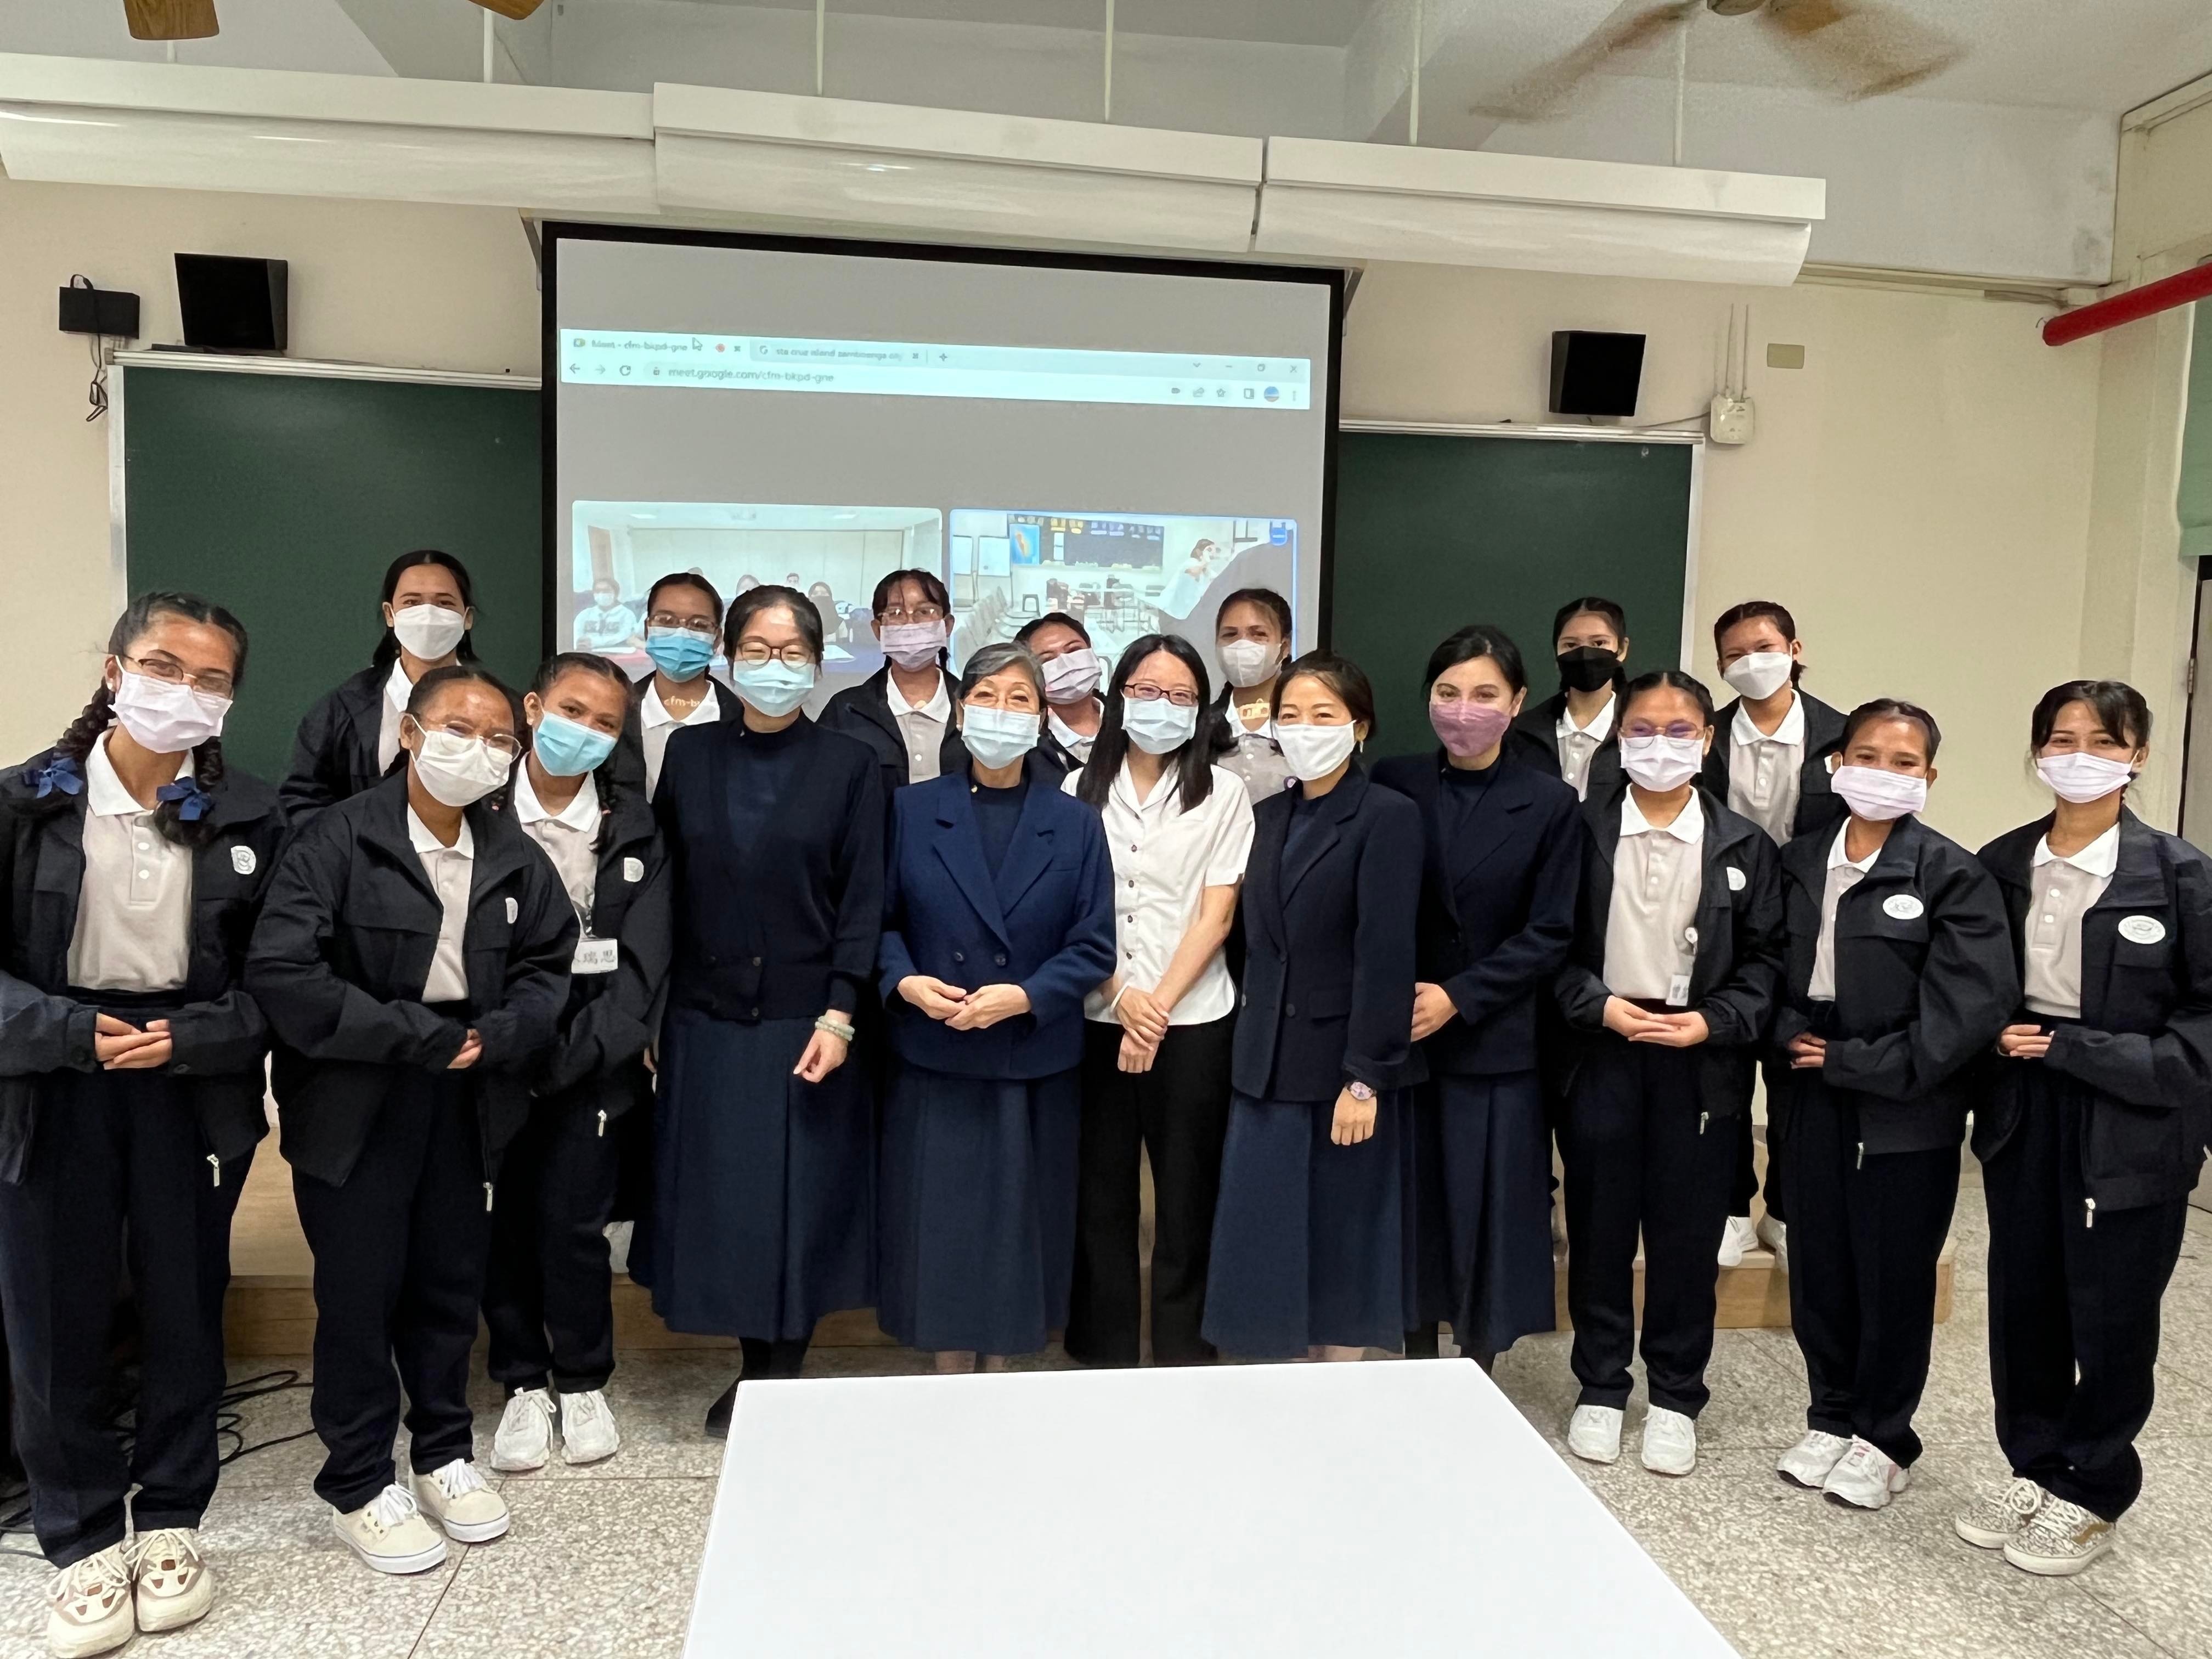 Scholars together with their teachers pose for a photo at the Tzu Chi University of Science and Technology.